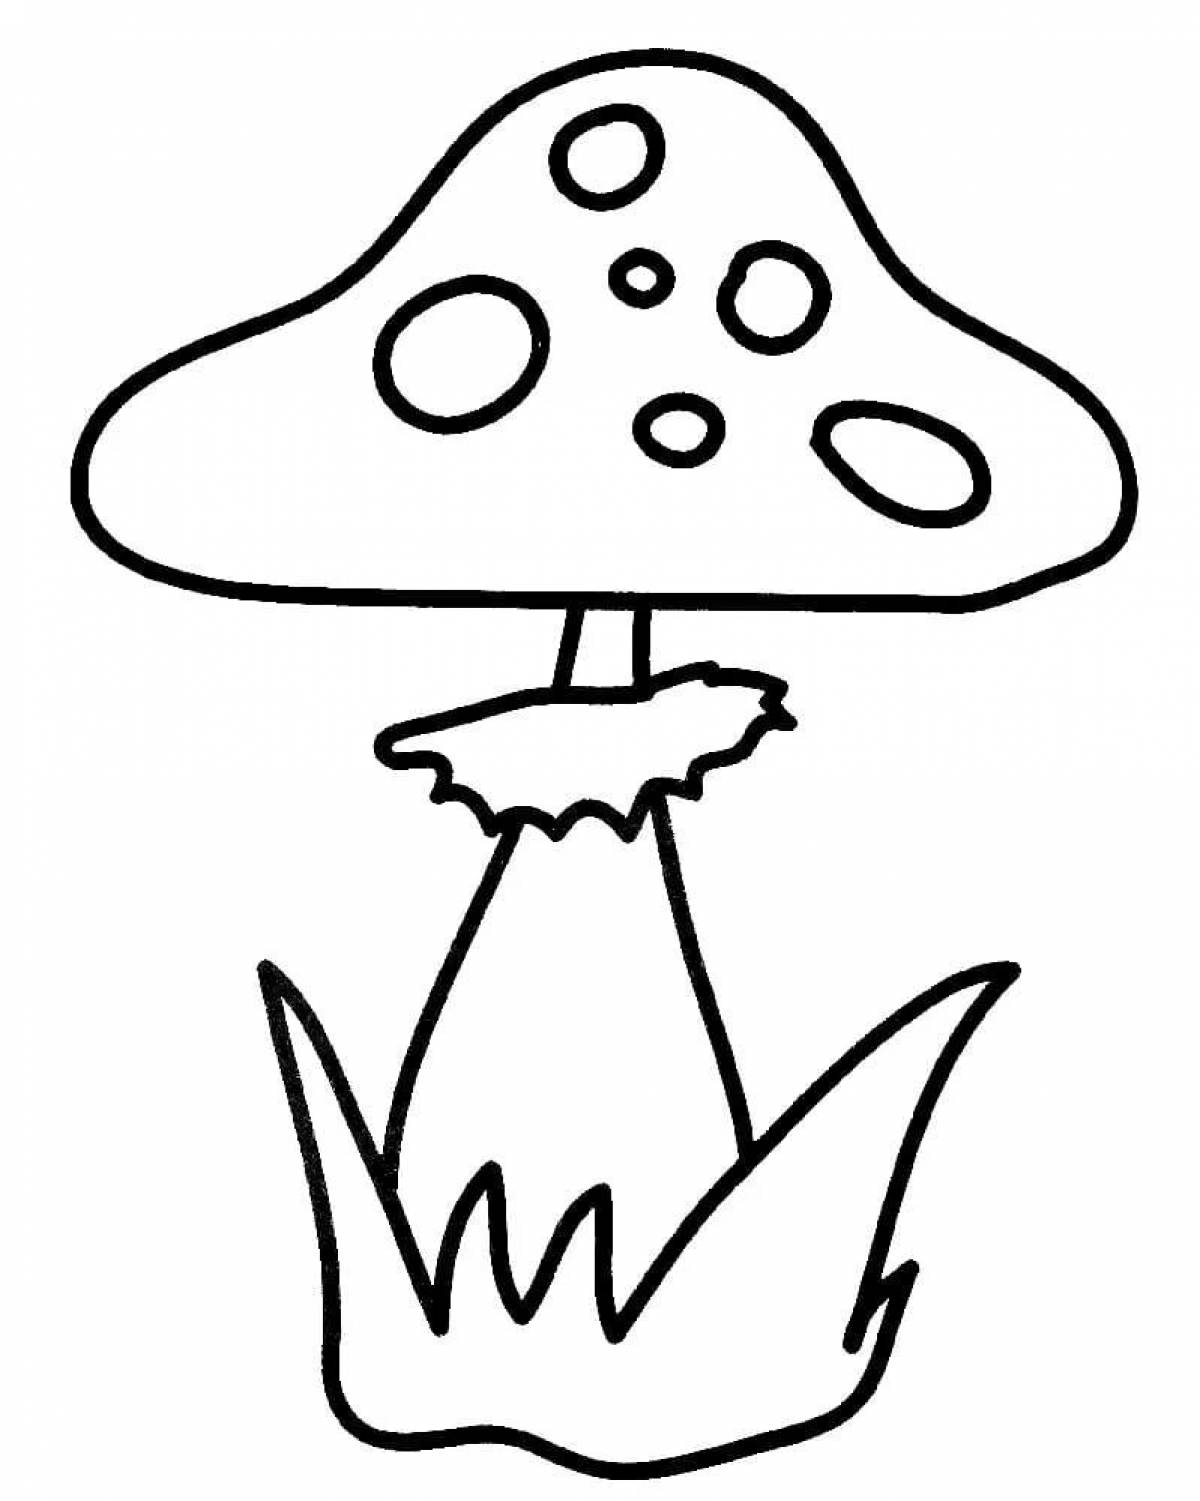 Fly agaric for babies #4